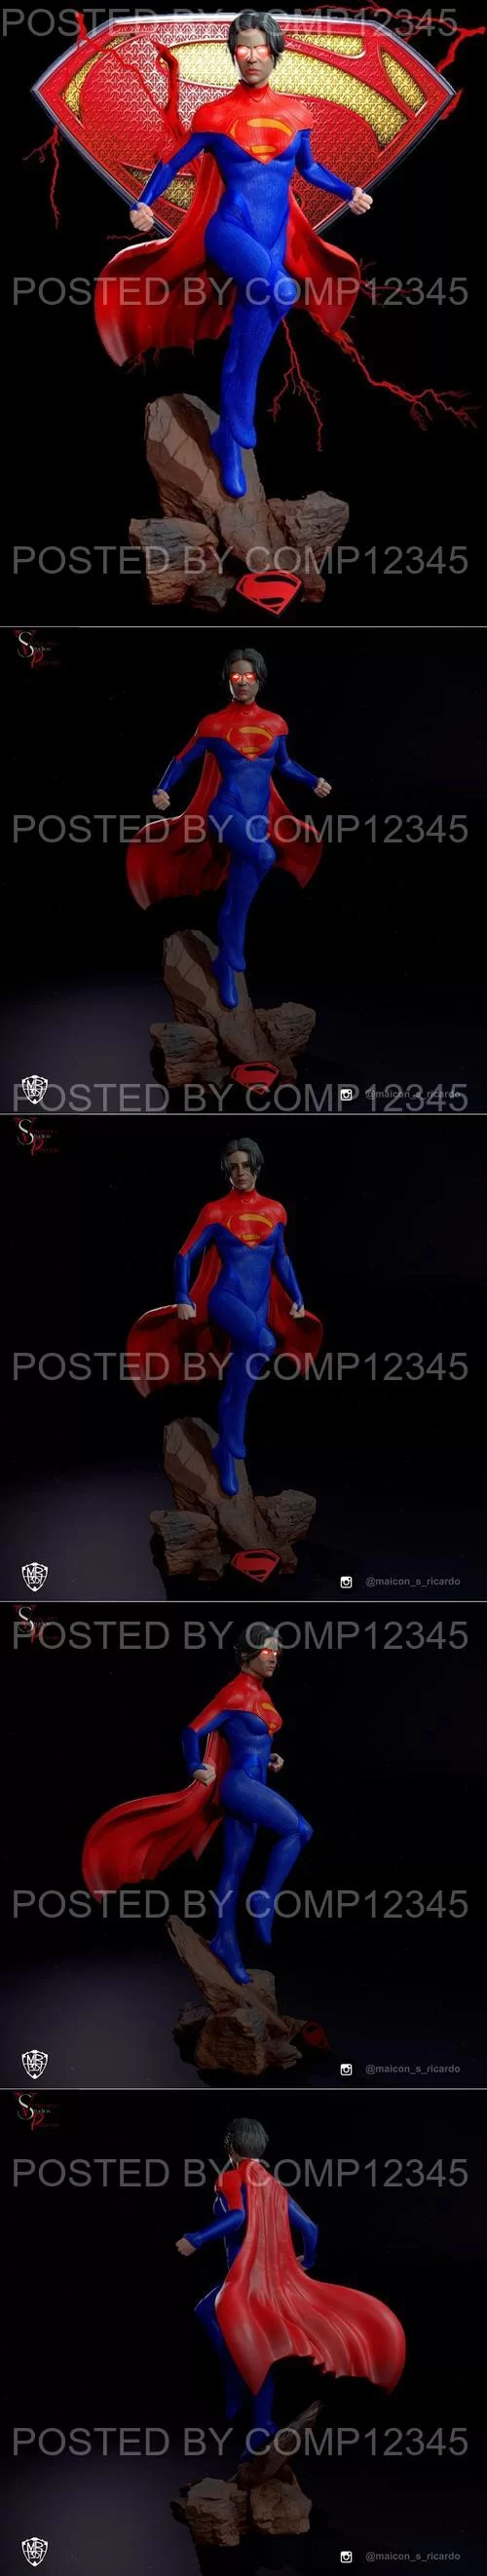 Supergirl from The Flash